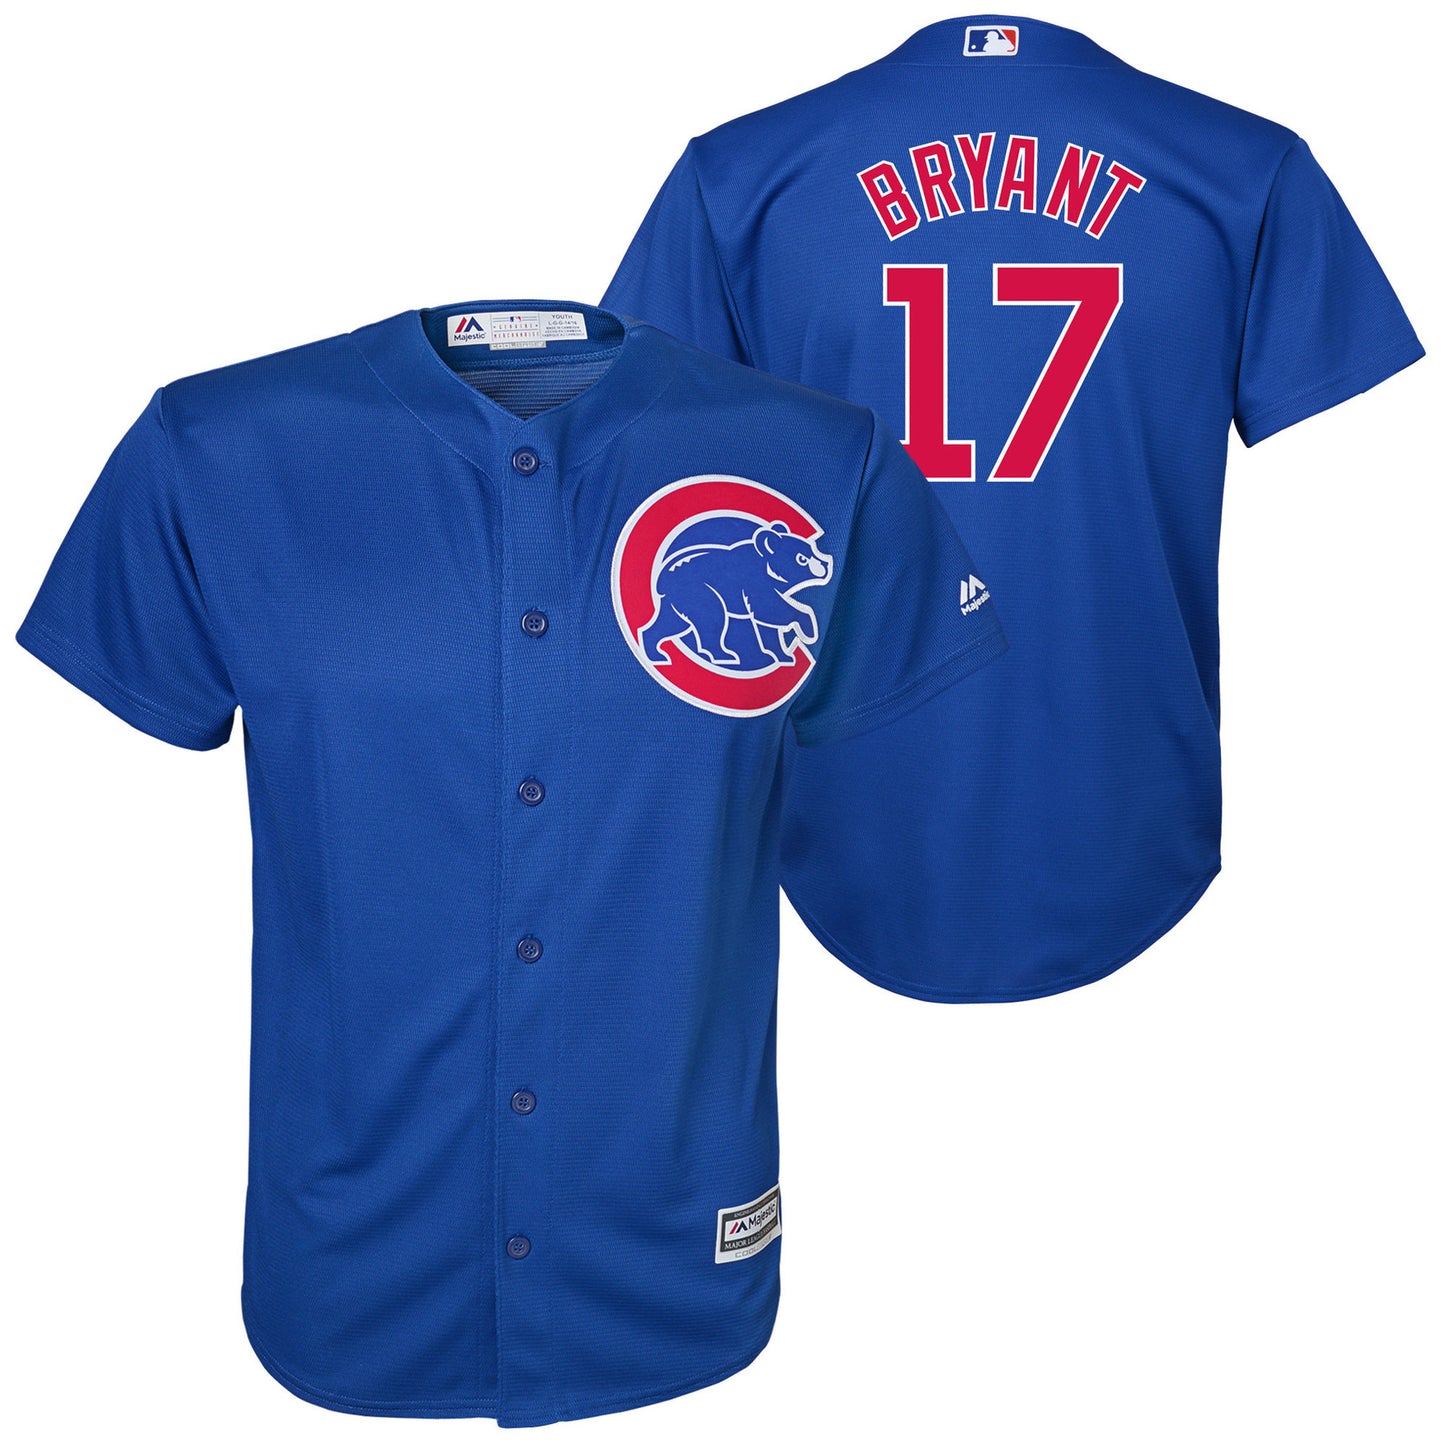 Kris Bryant Chicago Cubs Youth Royal Alternate Replica Jersey